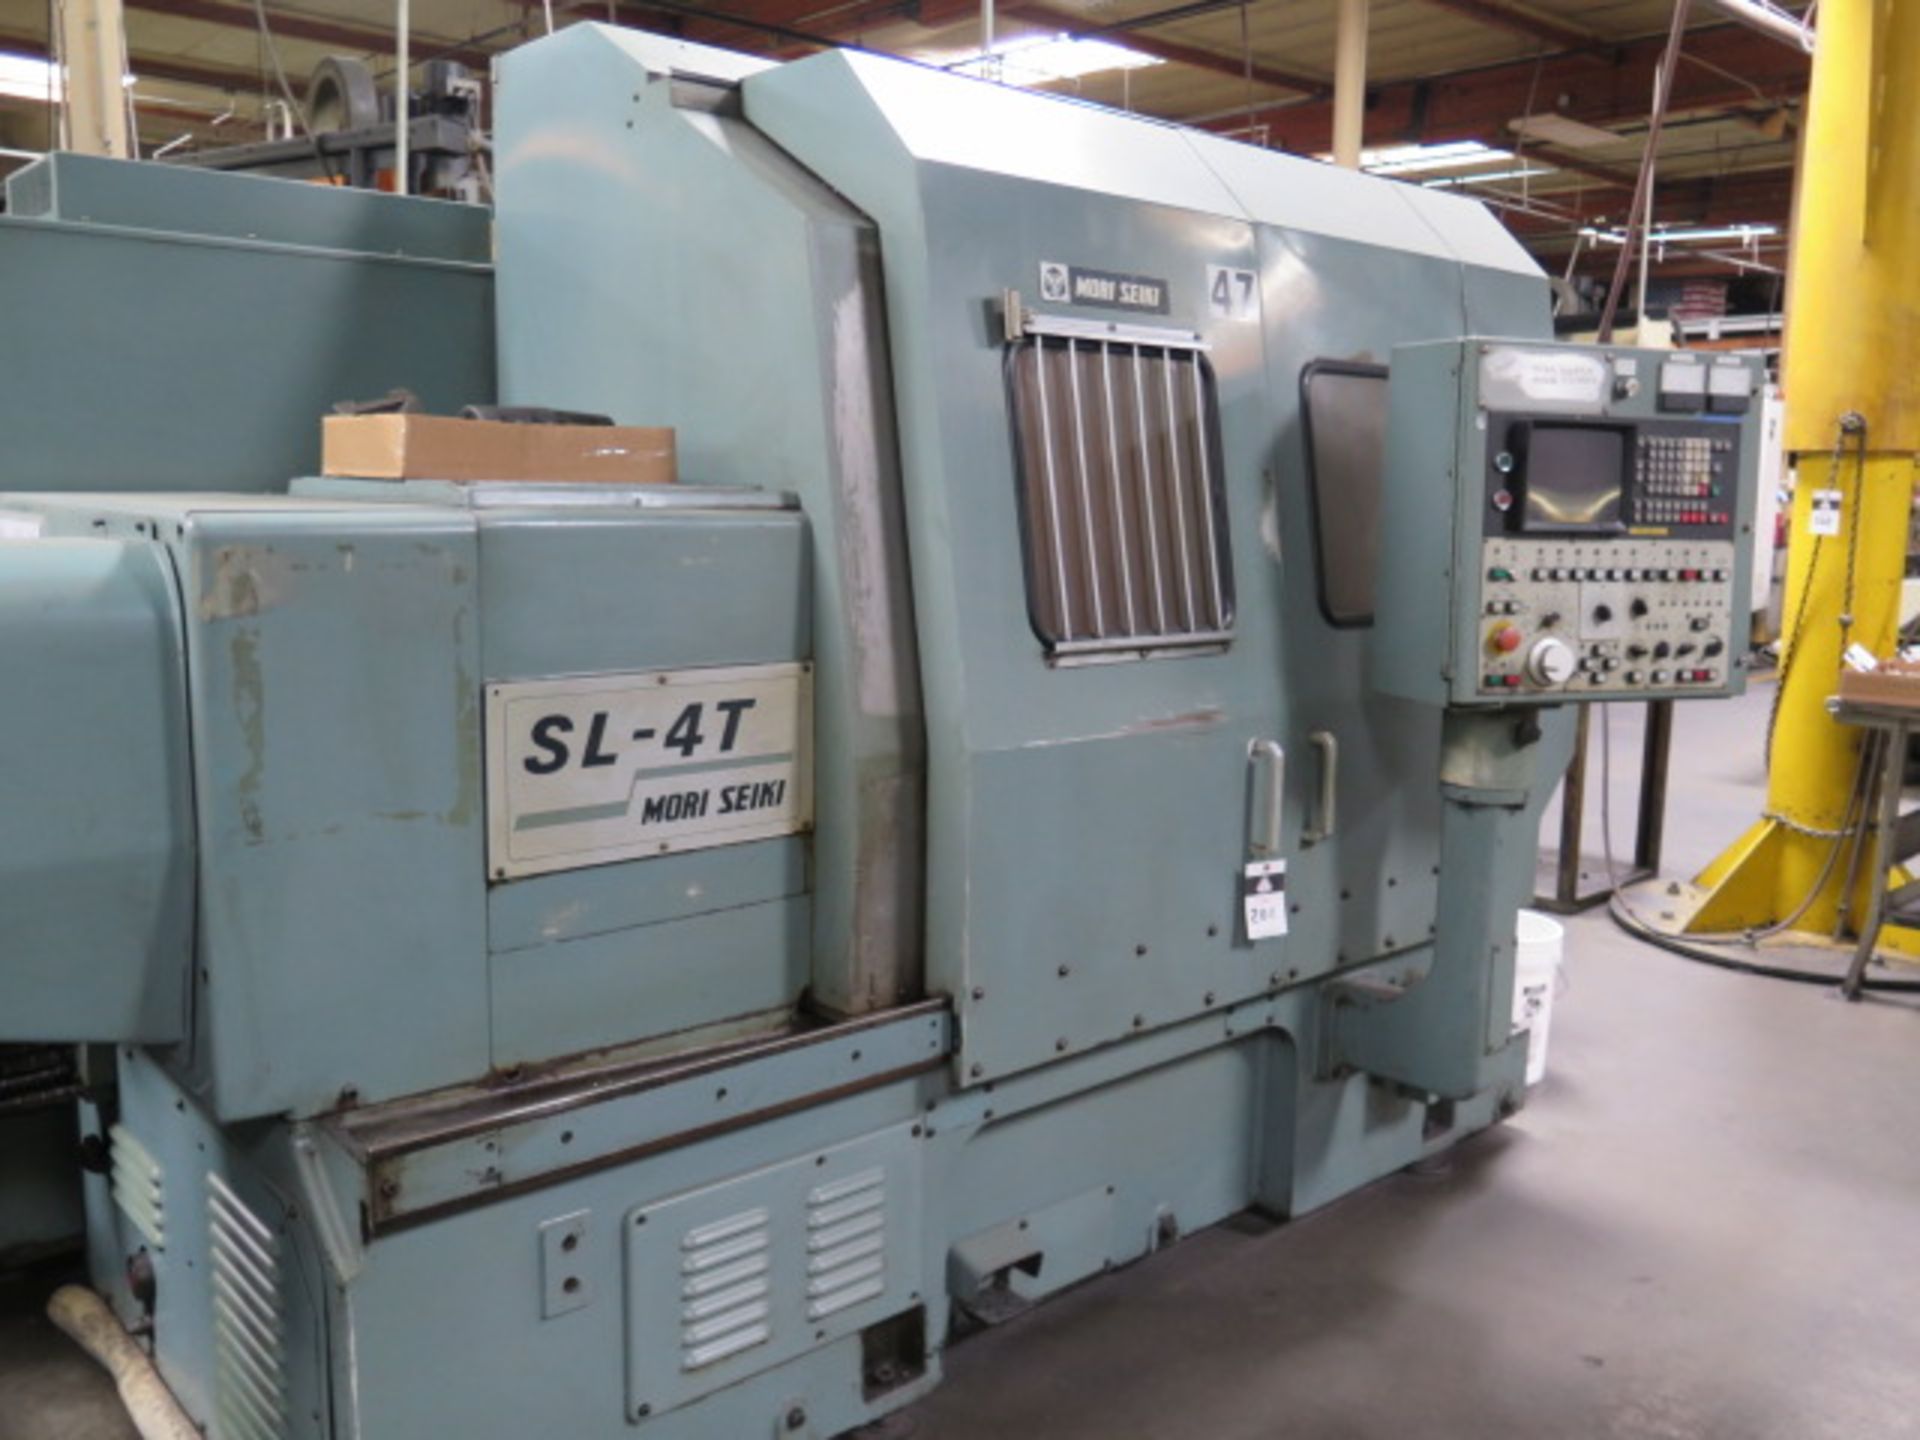 Mori Seiki SL-4T CNC Turning Center s/n 9 w/ Fanuc 6T Controls, 12-Station Turret, SOLD AS IS - Image 3 of 13